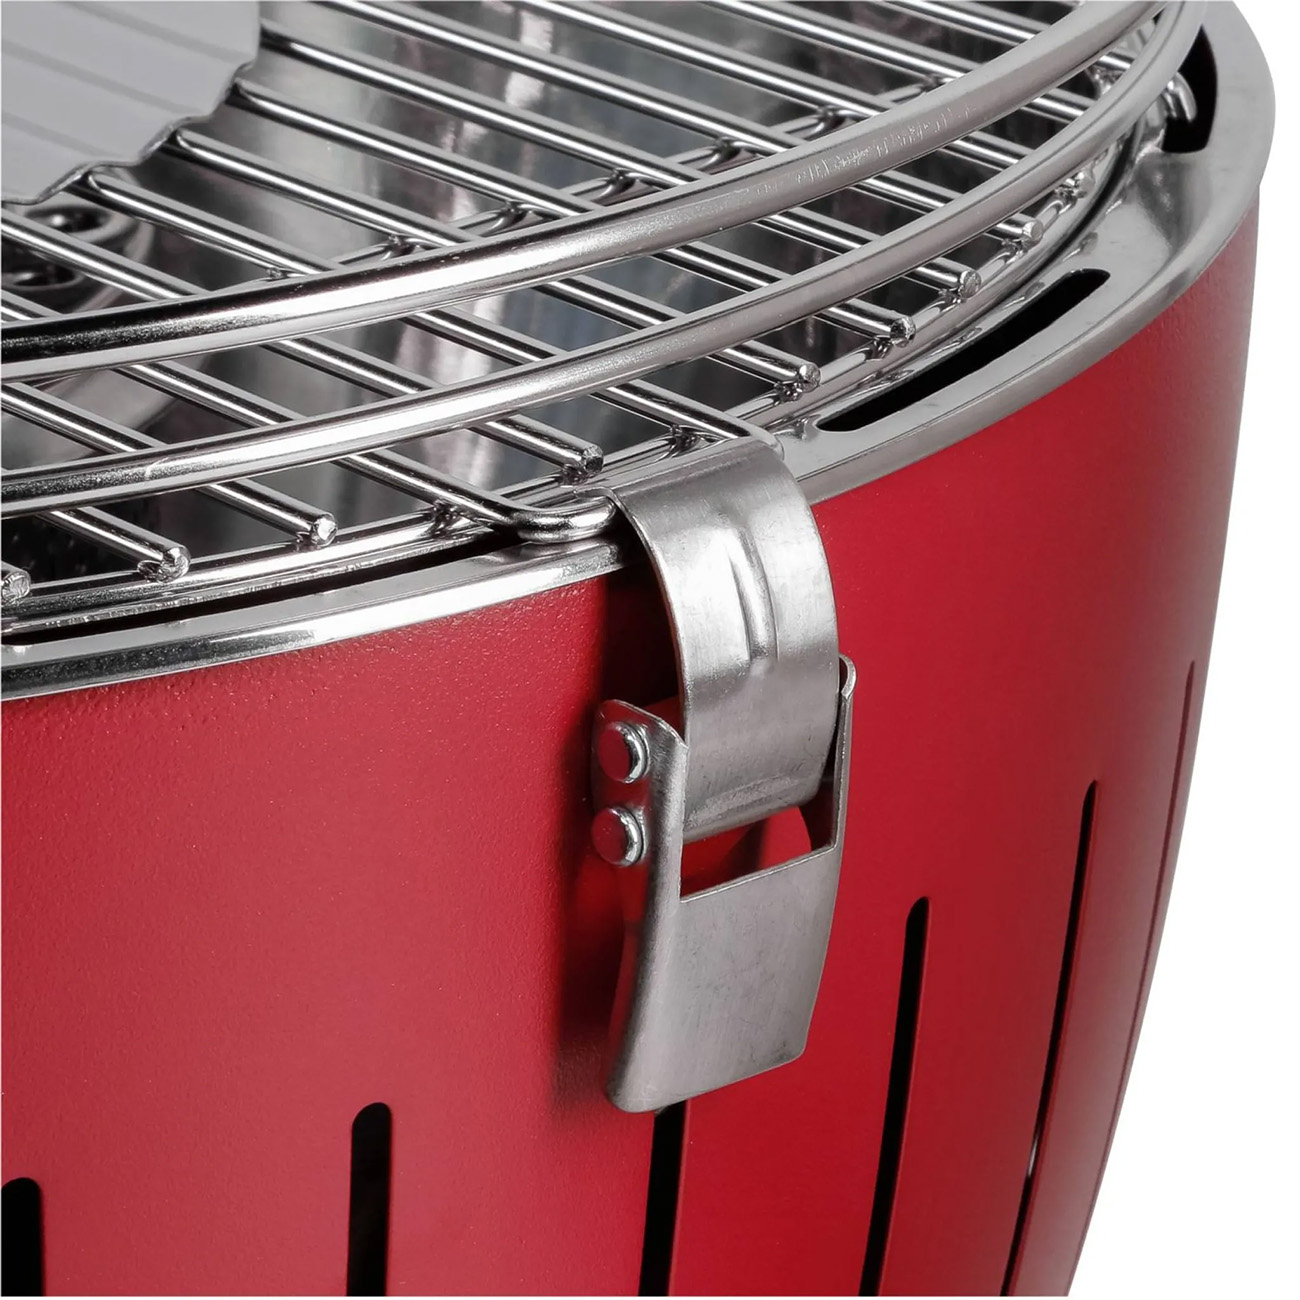 LOTUSGRILL G-280 Holzkohlegrill, rot